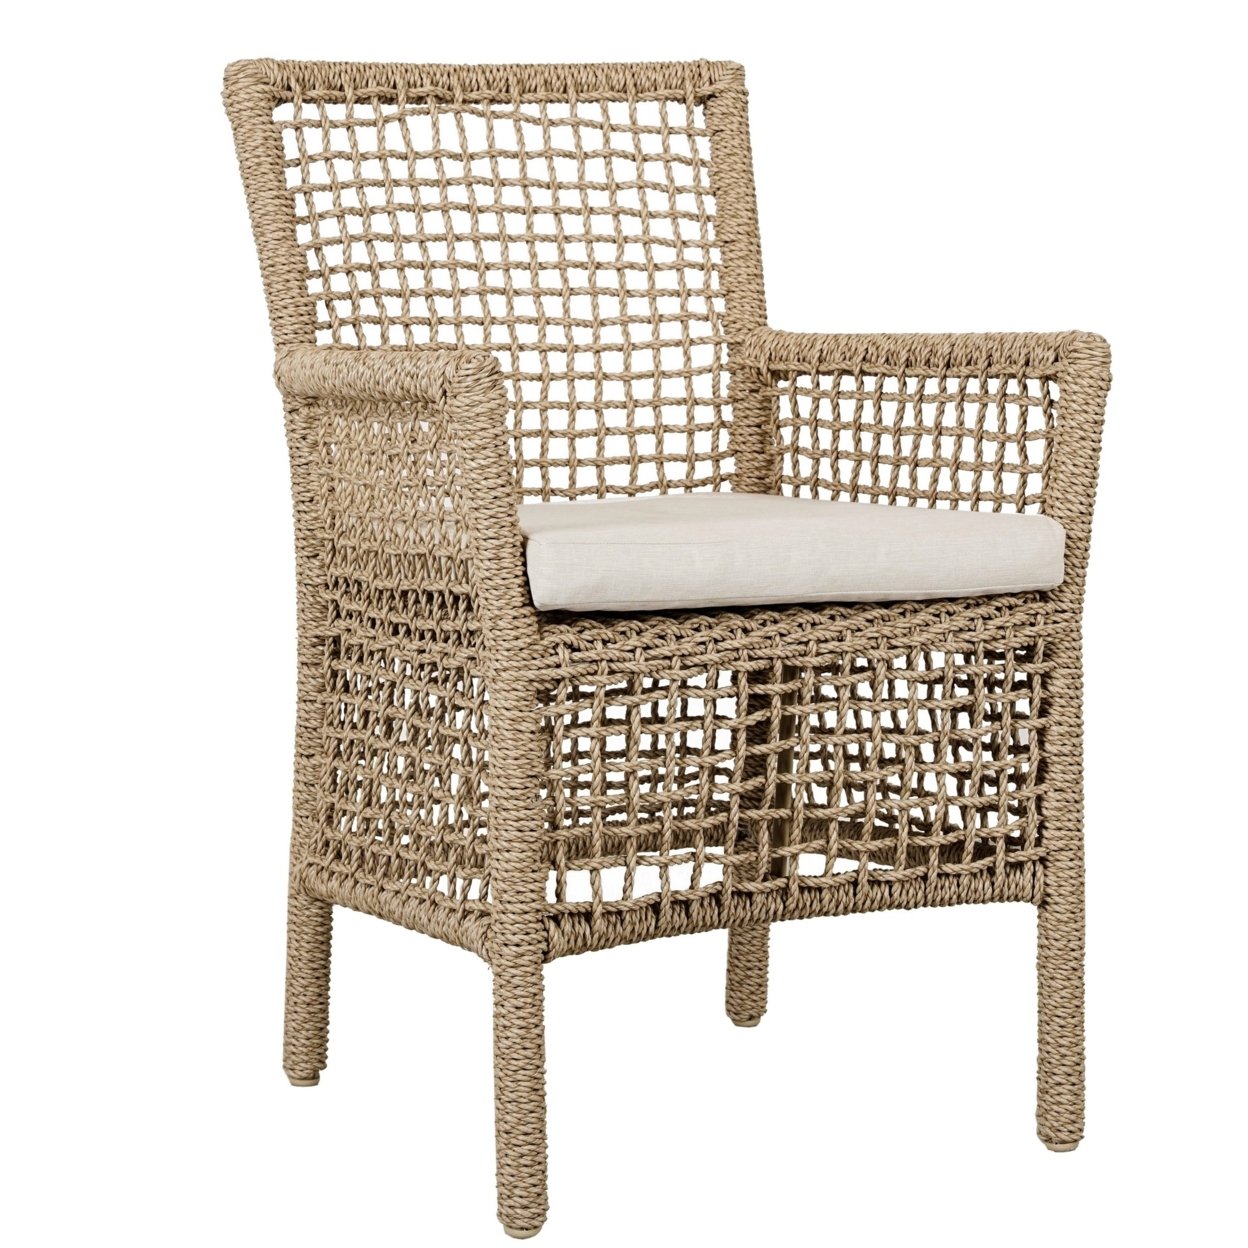 Zev 25 Inch Outdoor Dining Chair, Hyacinth Rope Woven, Ivory Olefin Fabric- Saltoro Sherpi